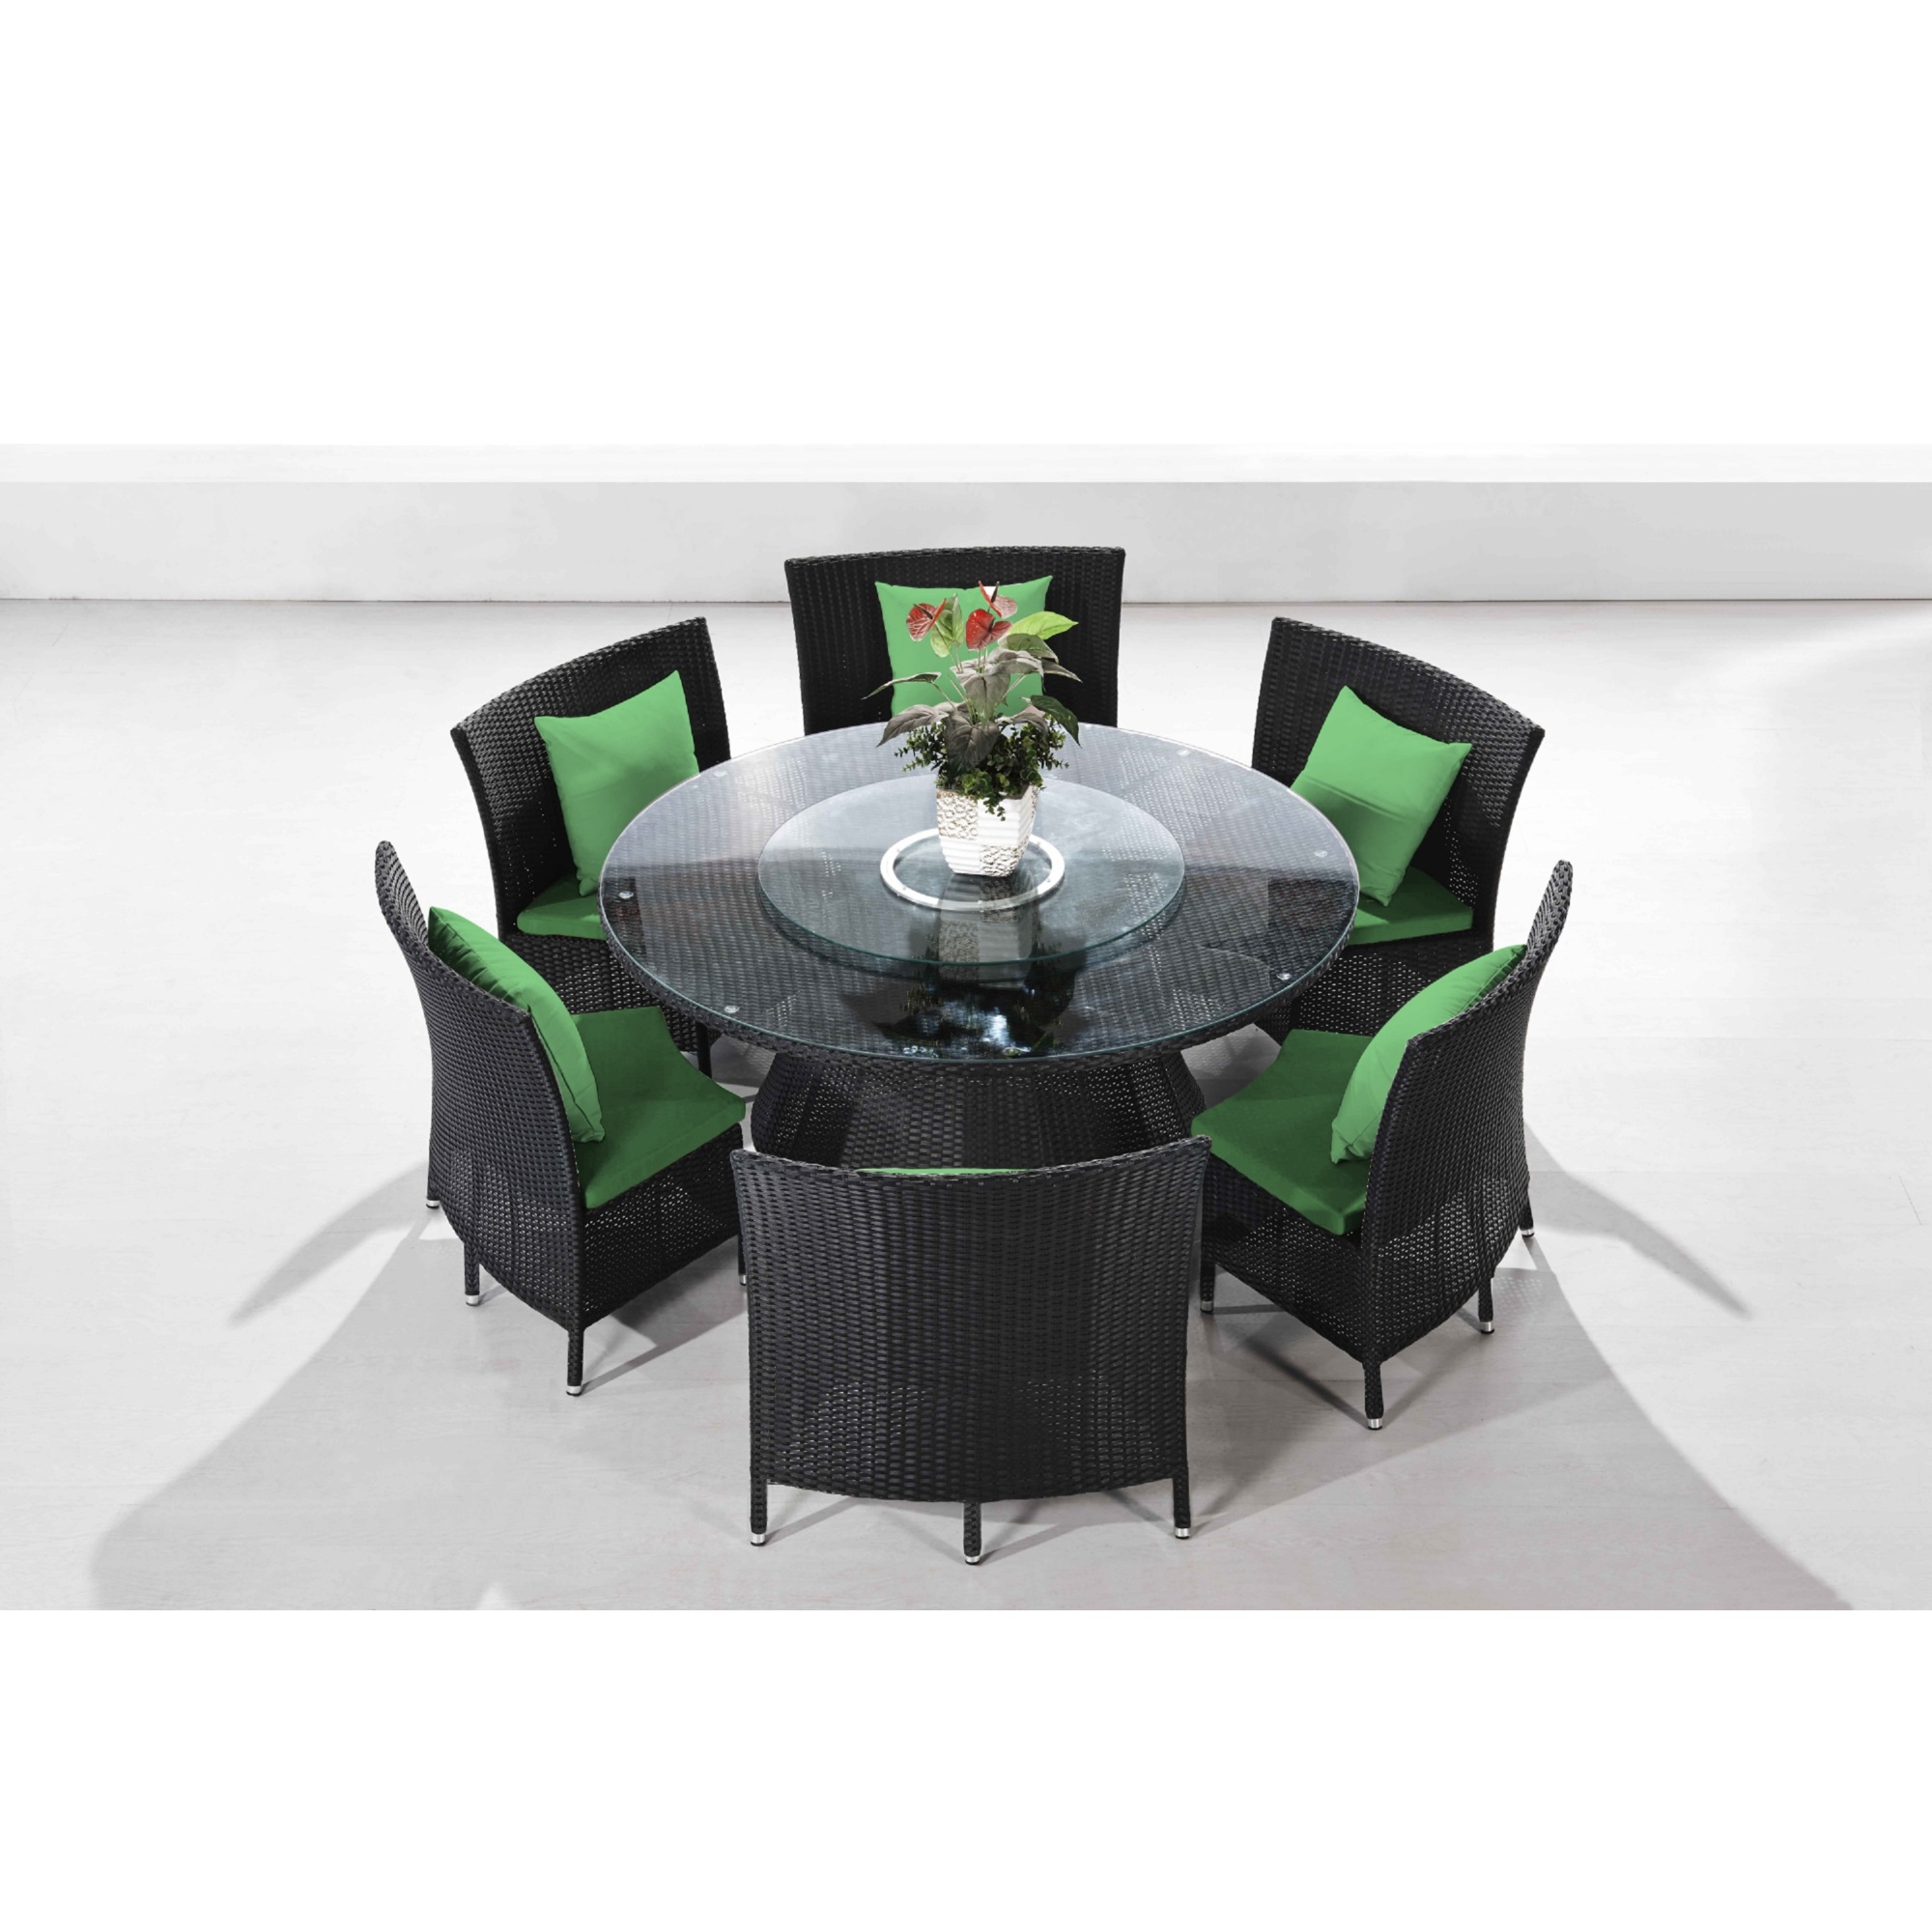 Manhattan Comfort, Nightingdale Black 7Pc Outdoor Dining Set Green, Pieces (qty.) 7 Primary Color Green, Seating Capacity 6 Model OD-DS001